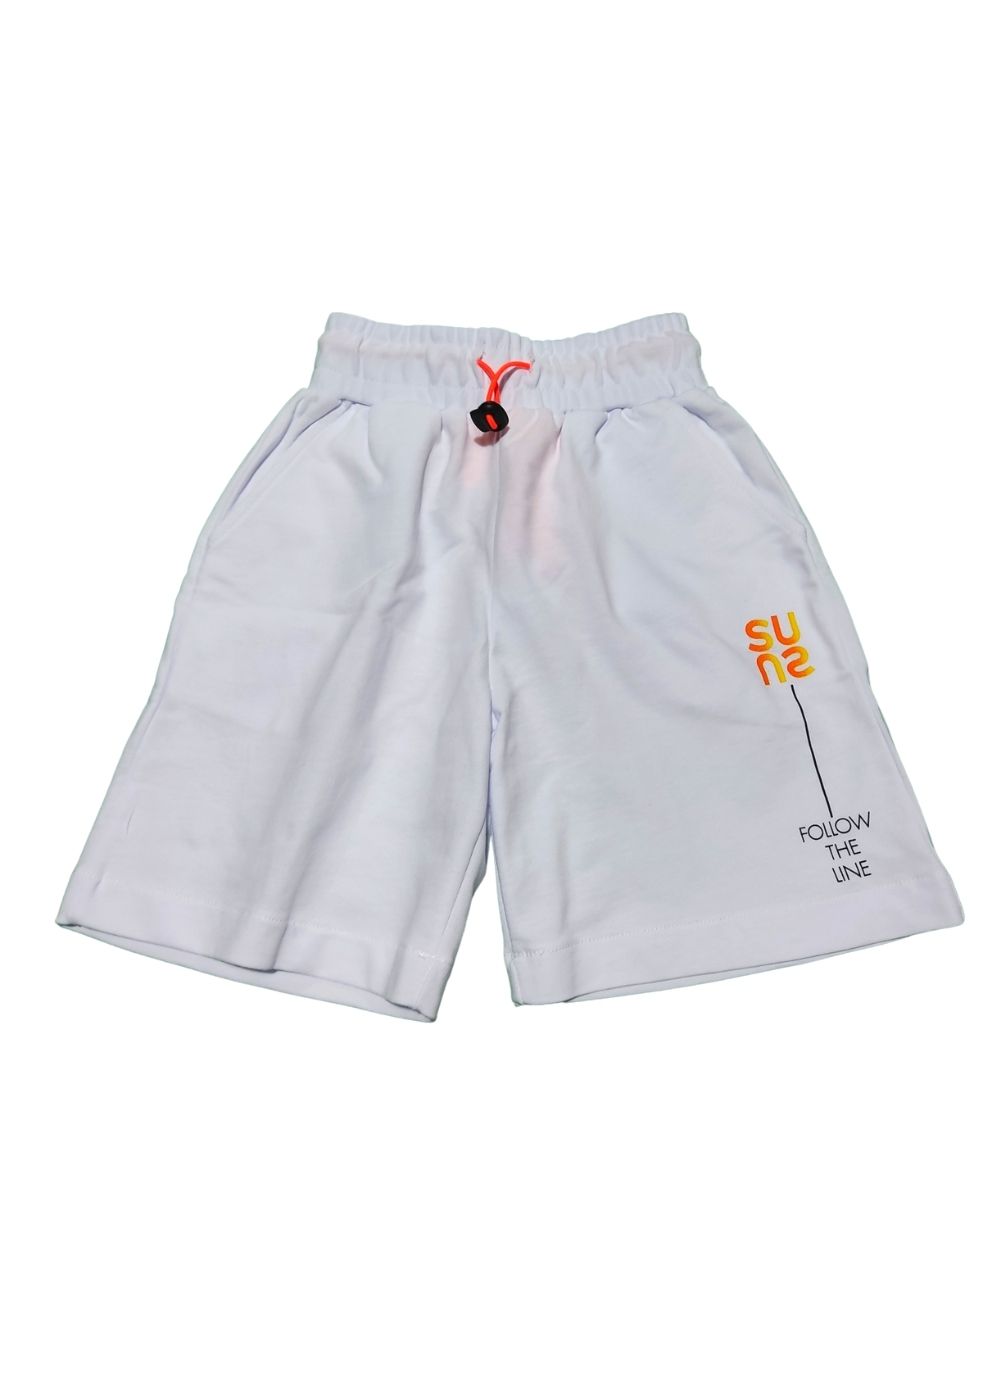 Featured image for “SUNS SHORTS BIANCO LOGO”